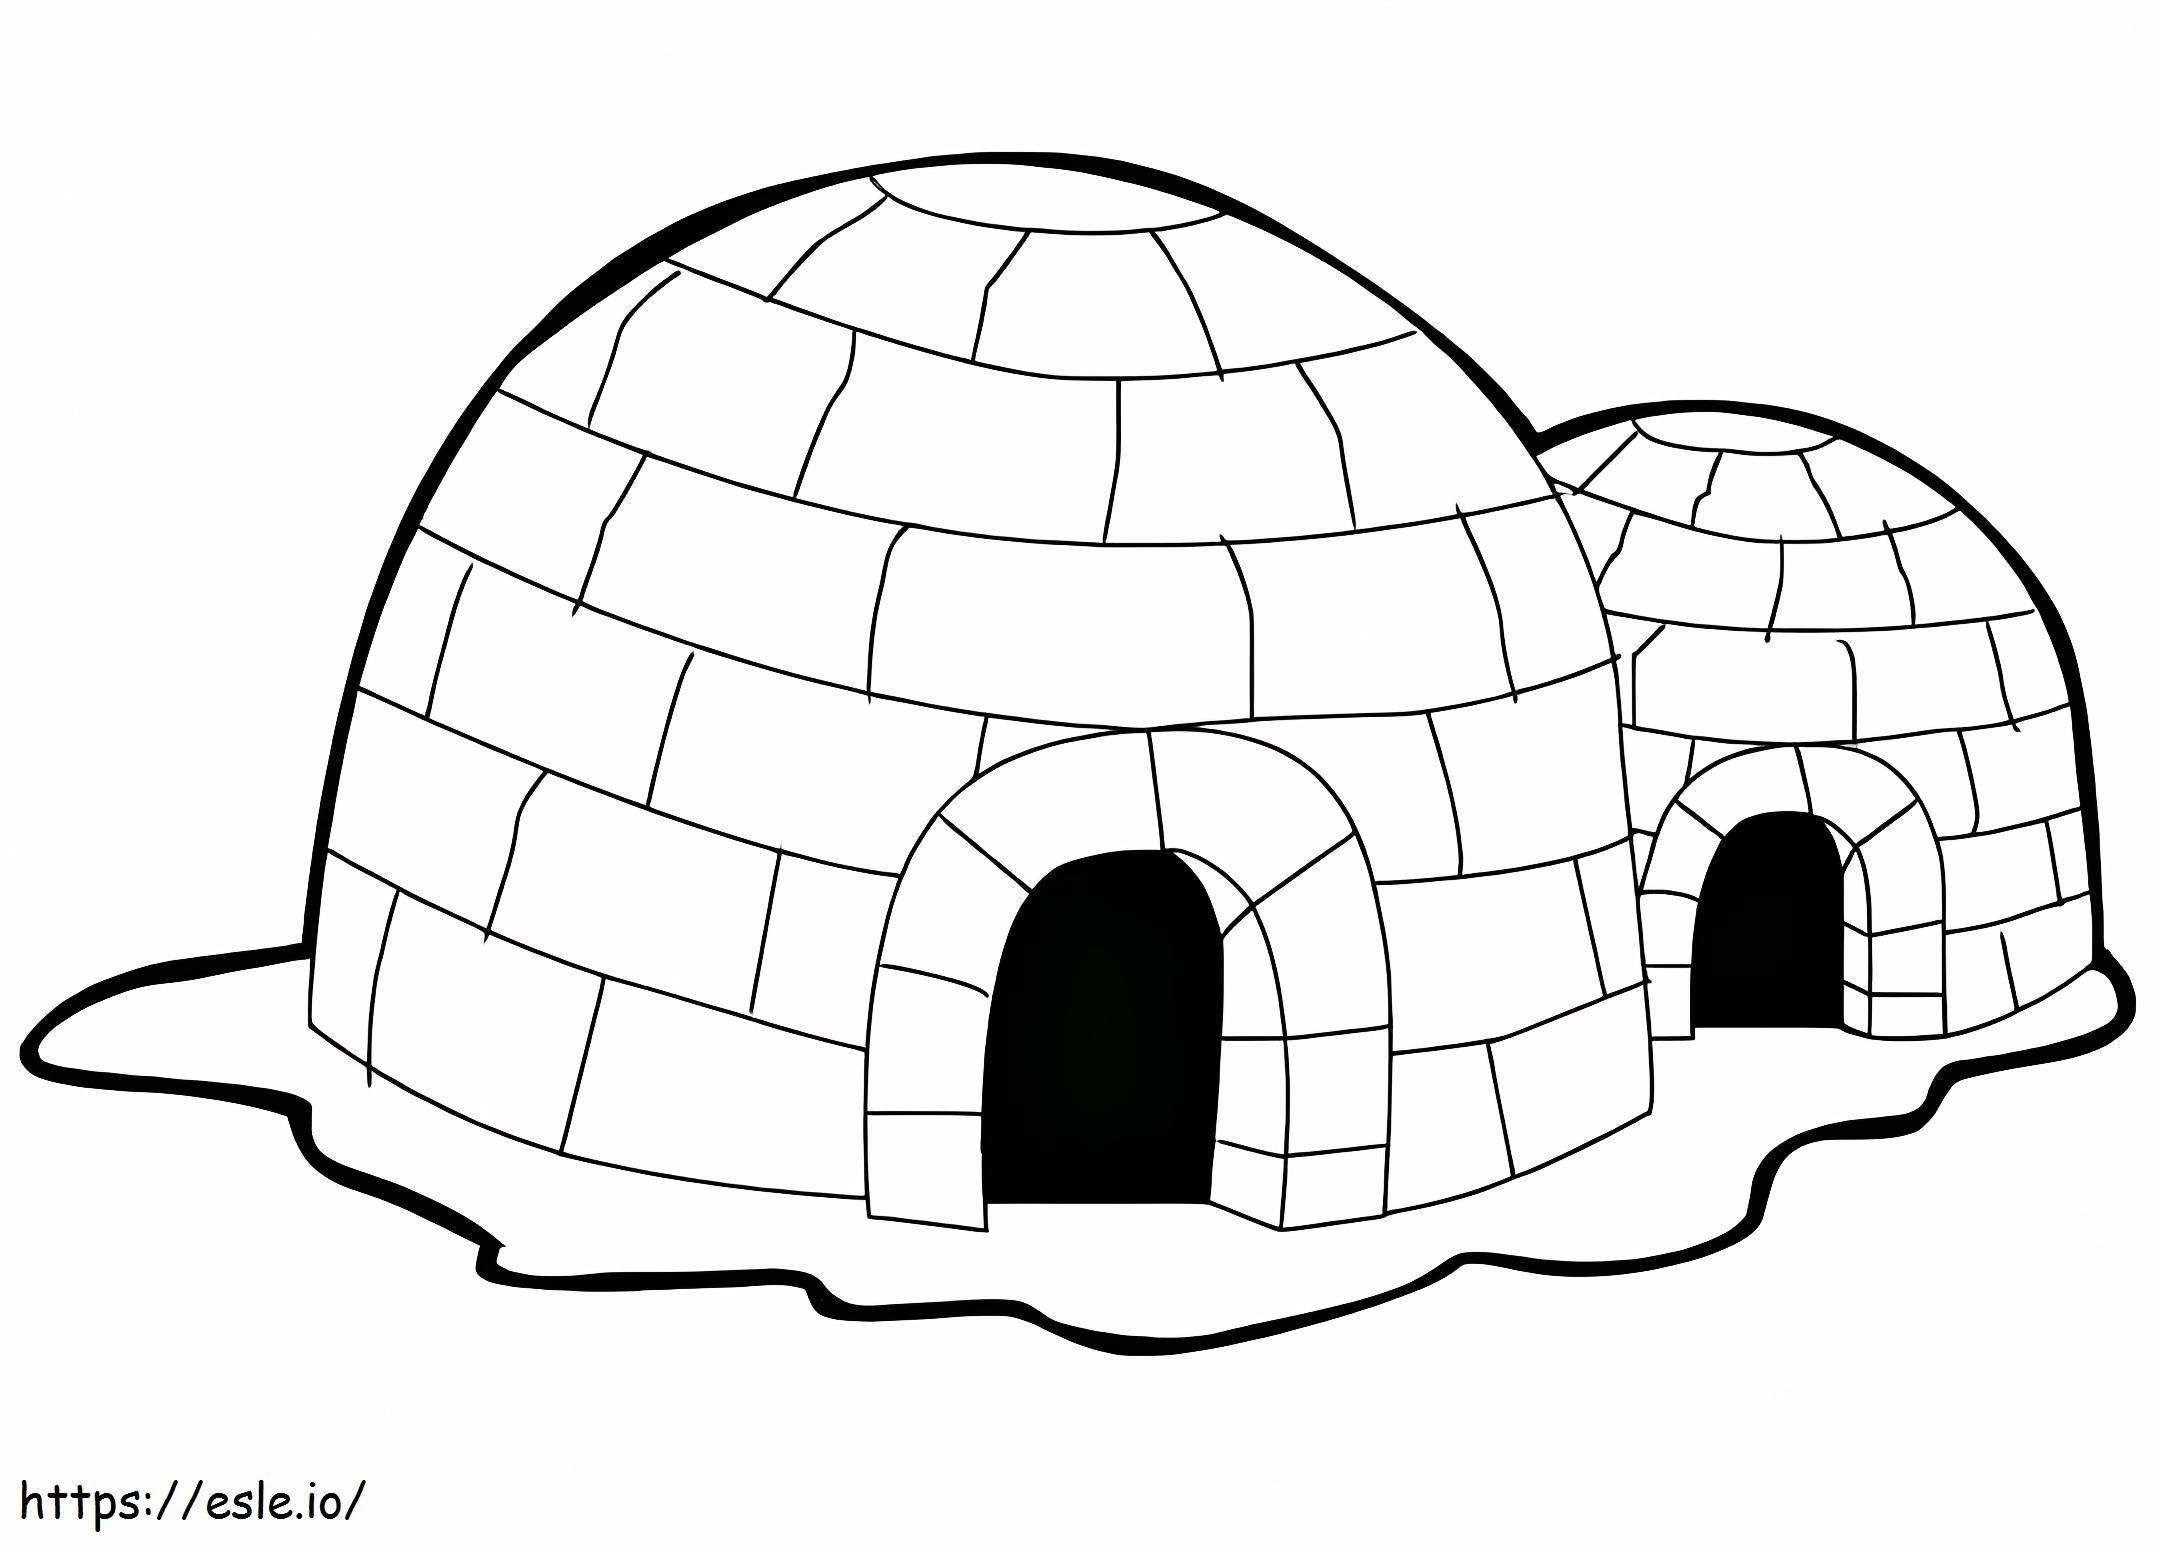 Igloo Houses coloring page